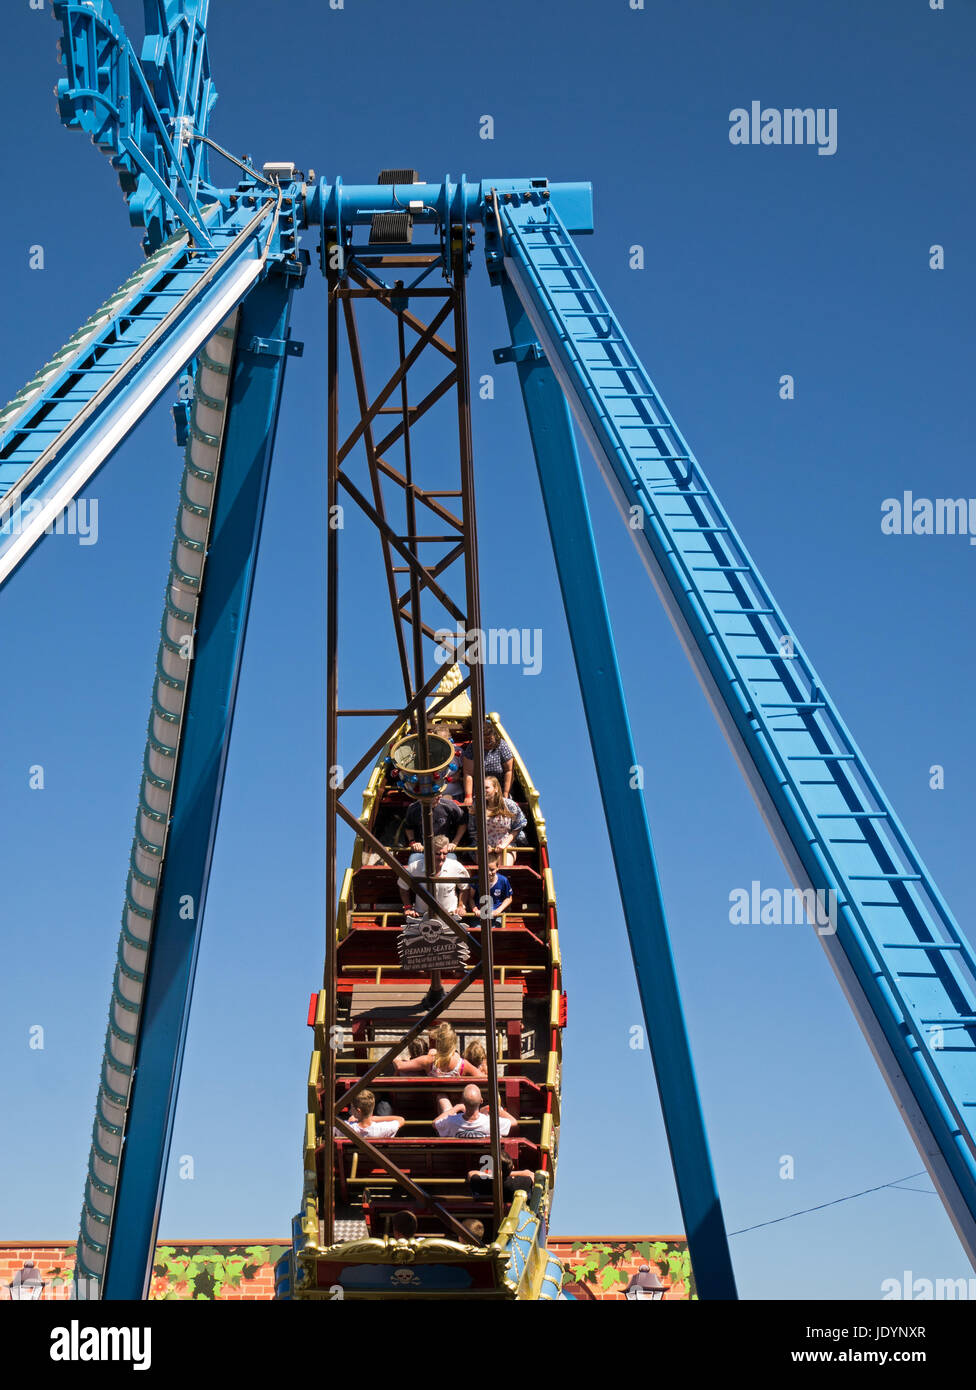 The Pirate Ship, a huge swinging gondola ride at The Pleasure Beach in Great Yarmouth, Norfolk, England, UK Stock Photo